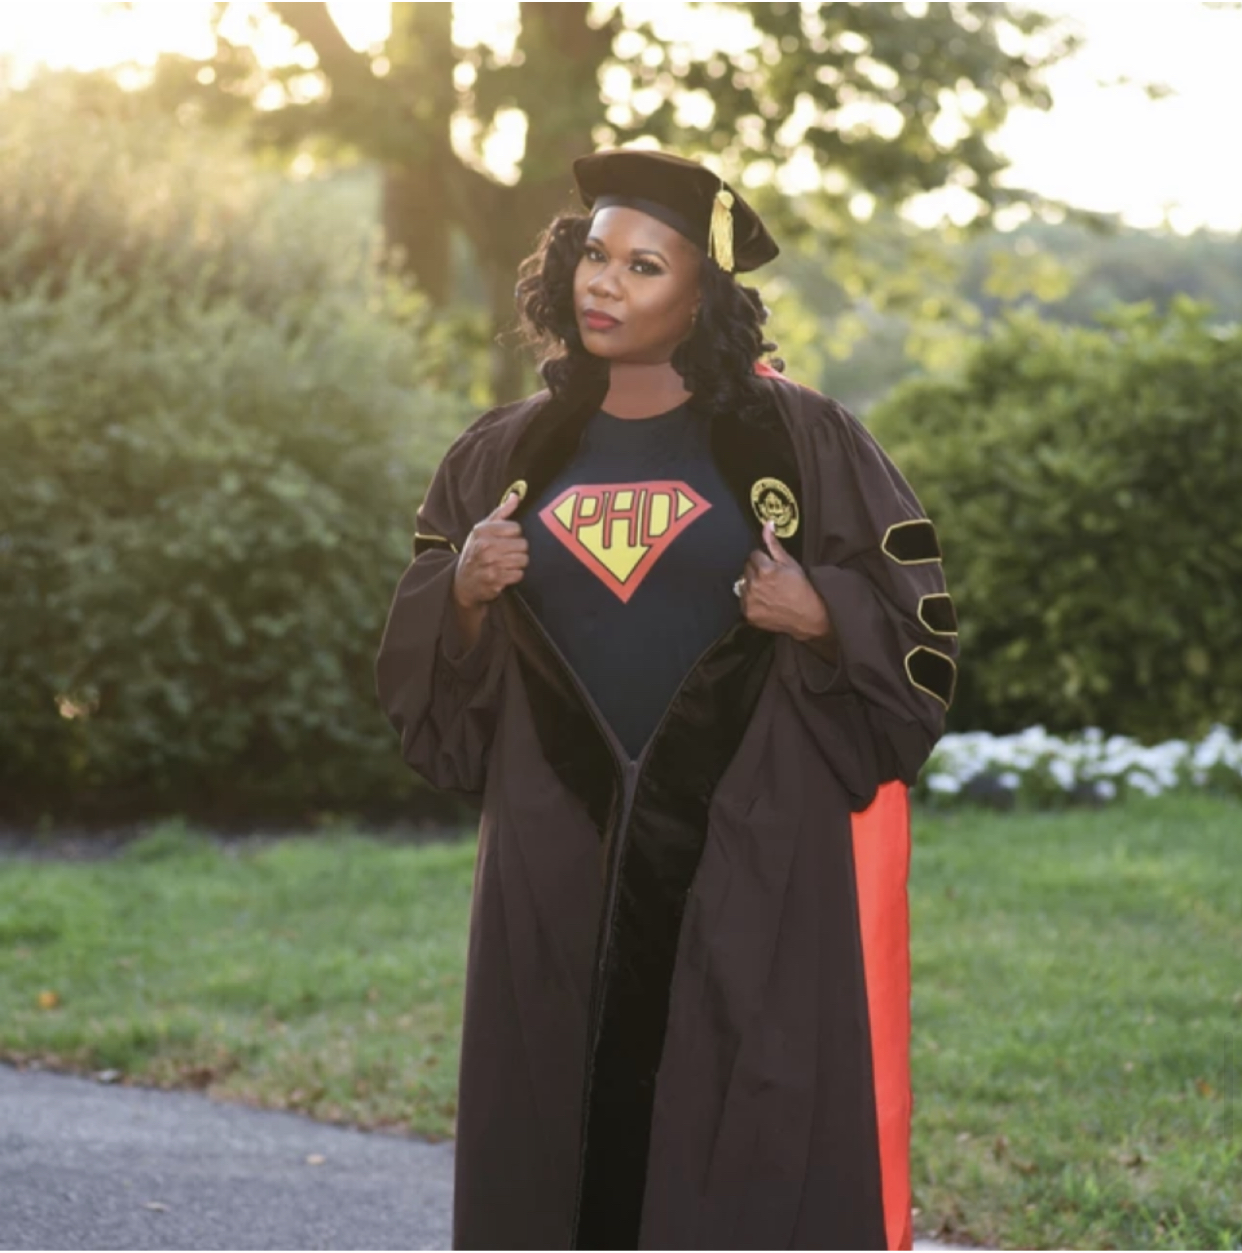 Janelle in her doctoral regalia with Ph.D superman shirt.